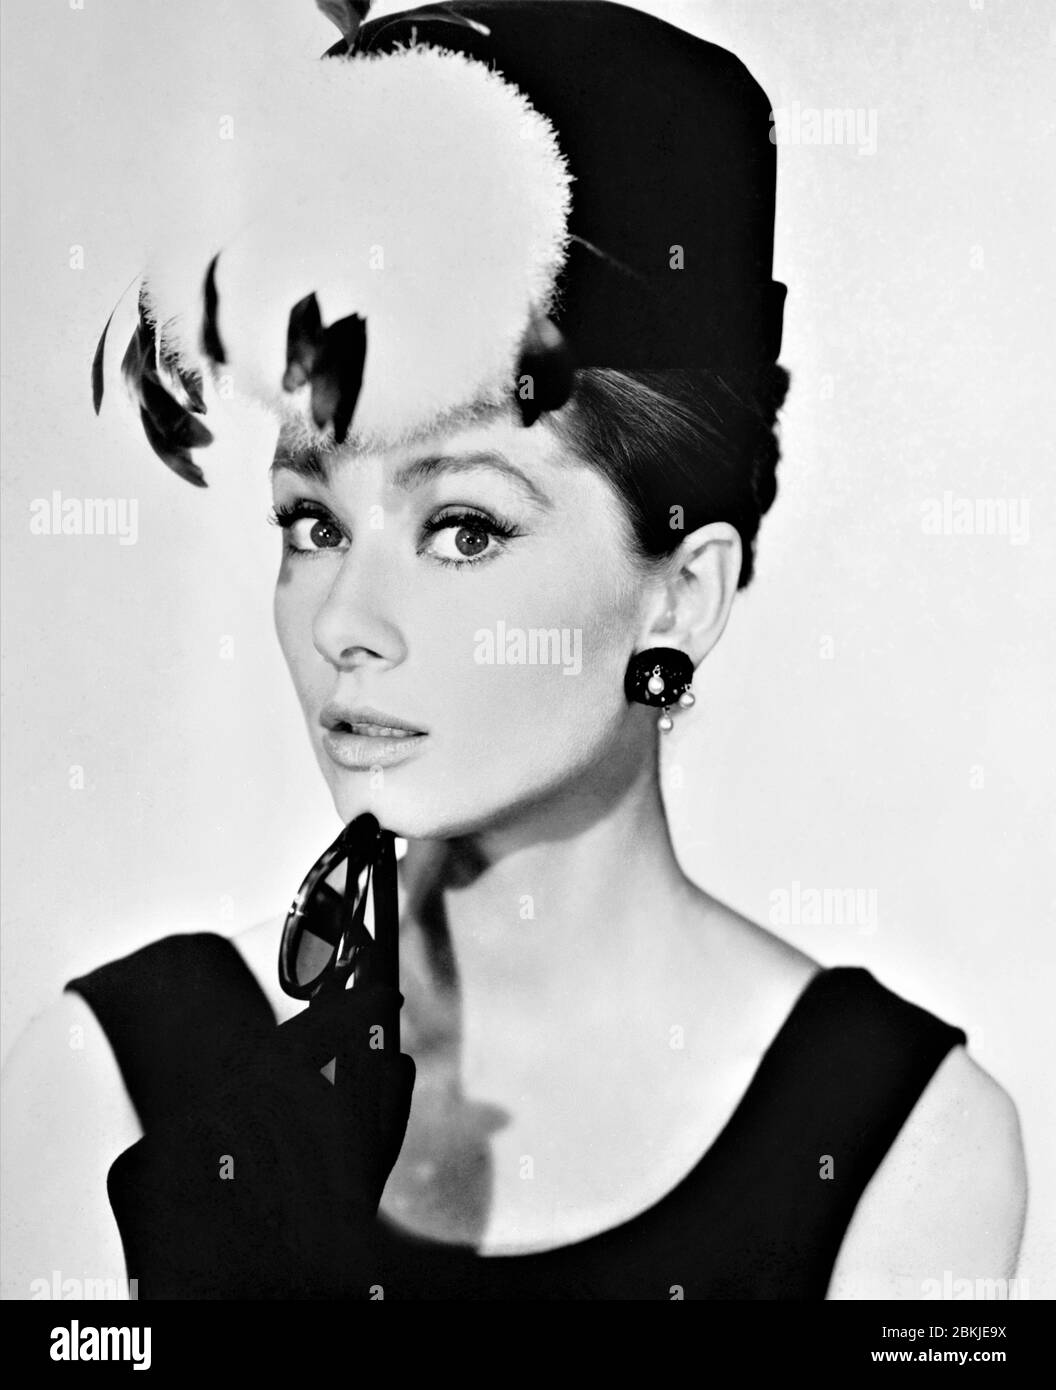 AUDREY HEPBURN as Holly Golightly Portrait by BUD FRAKER for BREAKFAST AT TIFFANY'S 1961 director BLAKE EDWARDS gown Hubert de Givenchy novel Truman Capote Jurow-Shepherd / Paramount Pictures Stock Photo